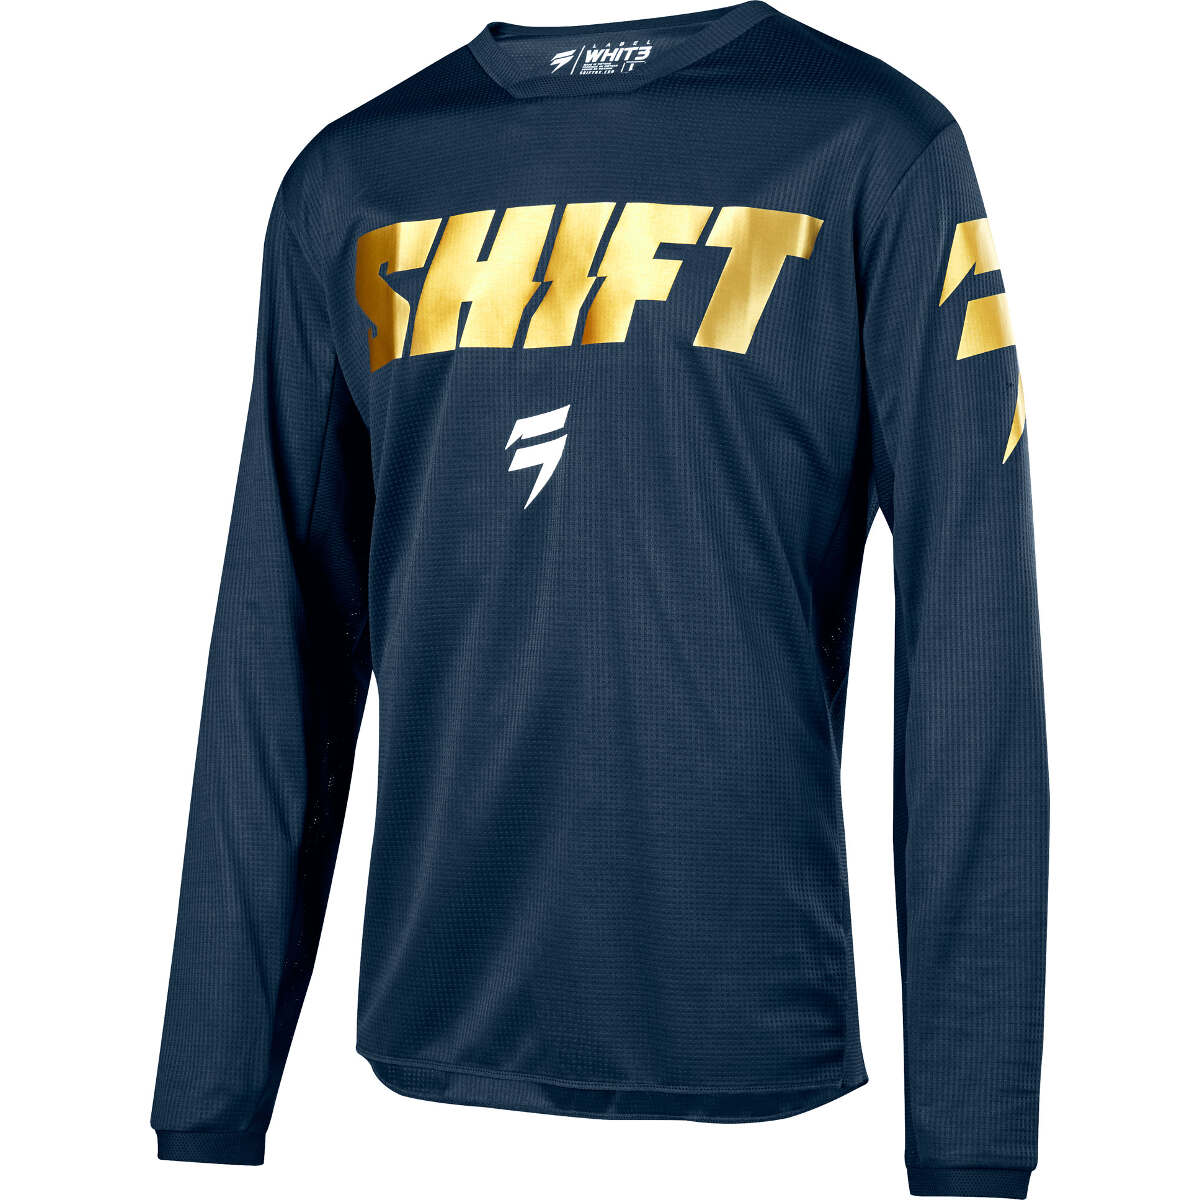 Shift Jersey Whit3 Label Navy/Gold - Limited Edition